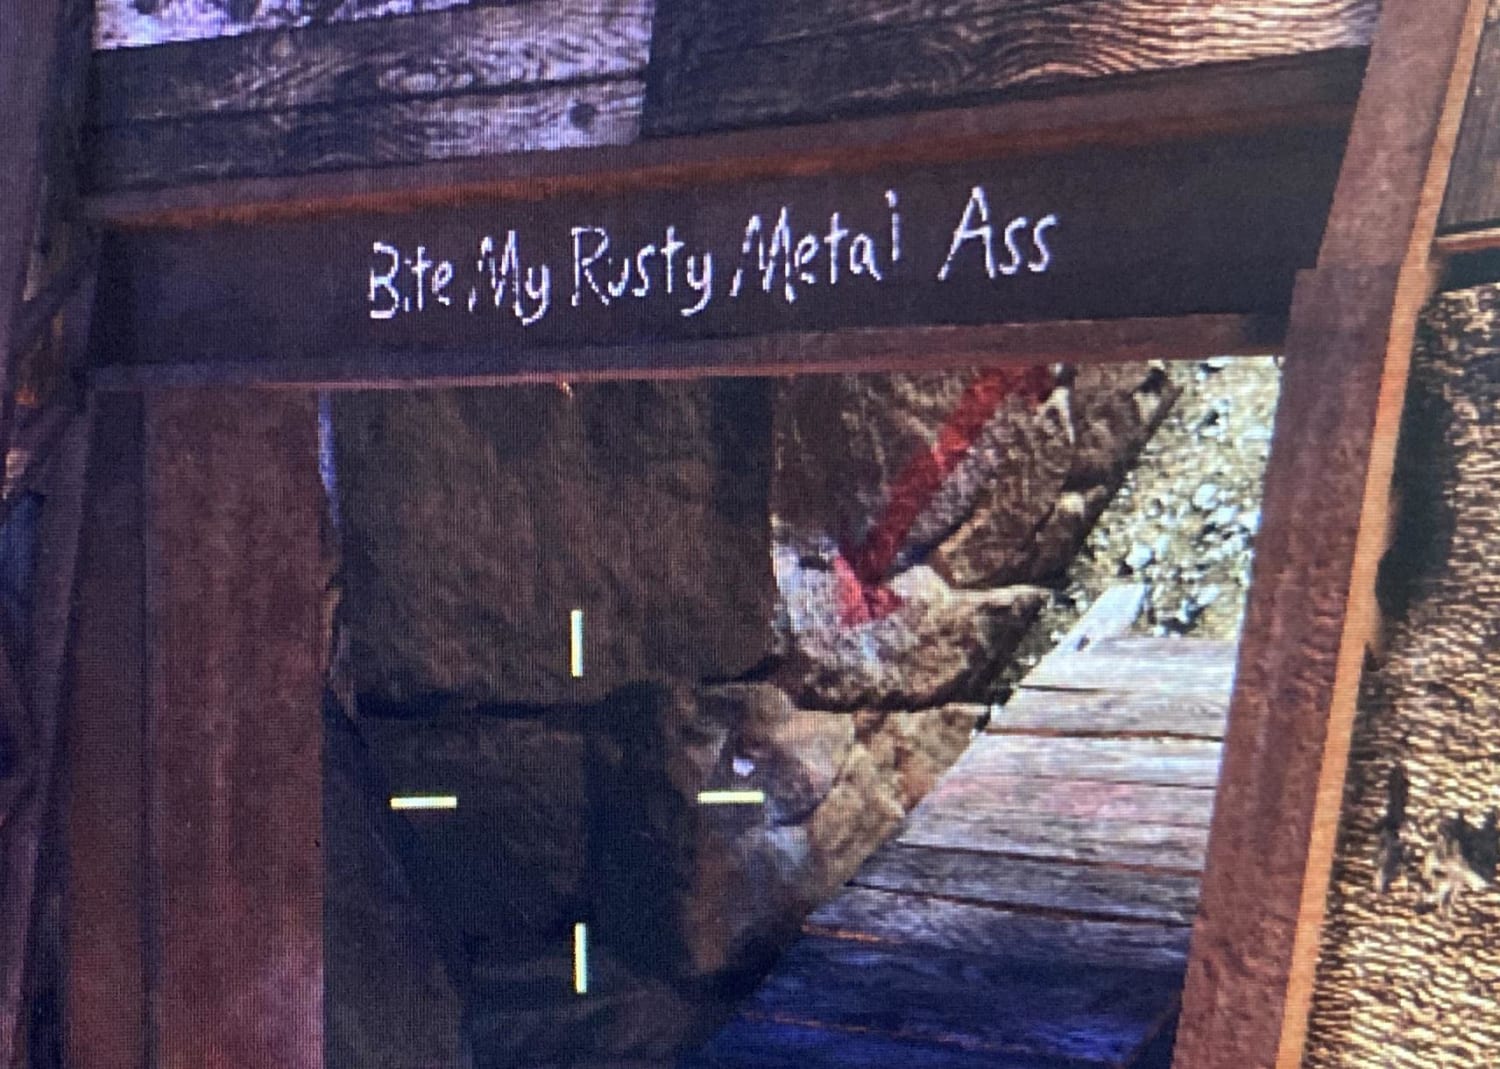 Noticed this lovely little Futurama Easter egg in one of my favorite games (Fallout 76)